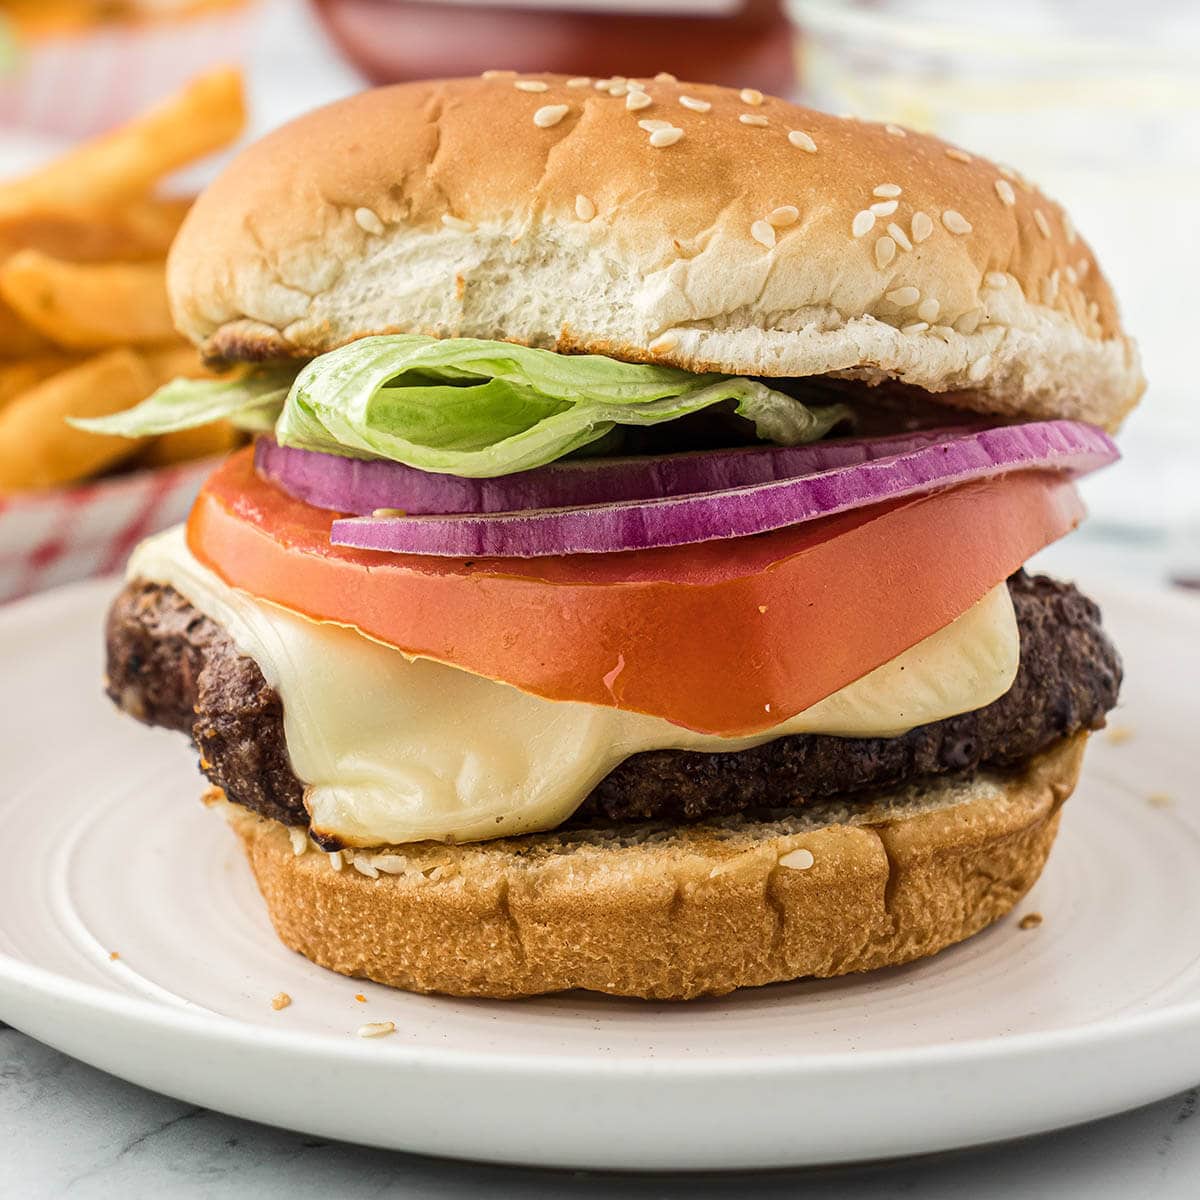 Grilled frozen hamburger on a plate.